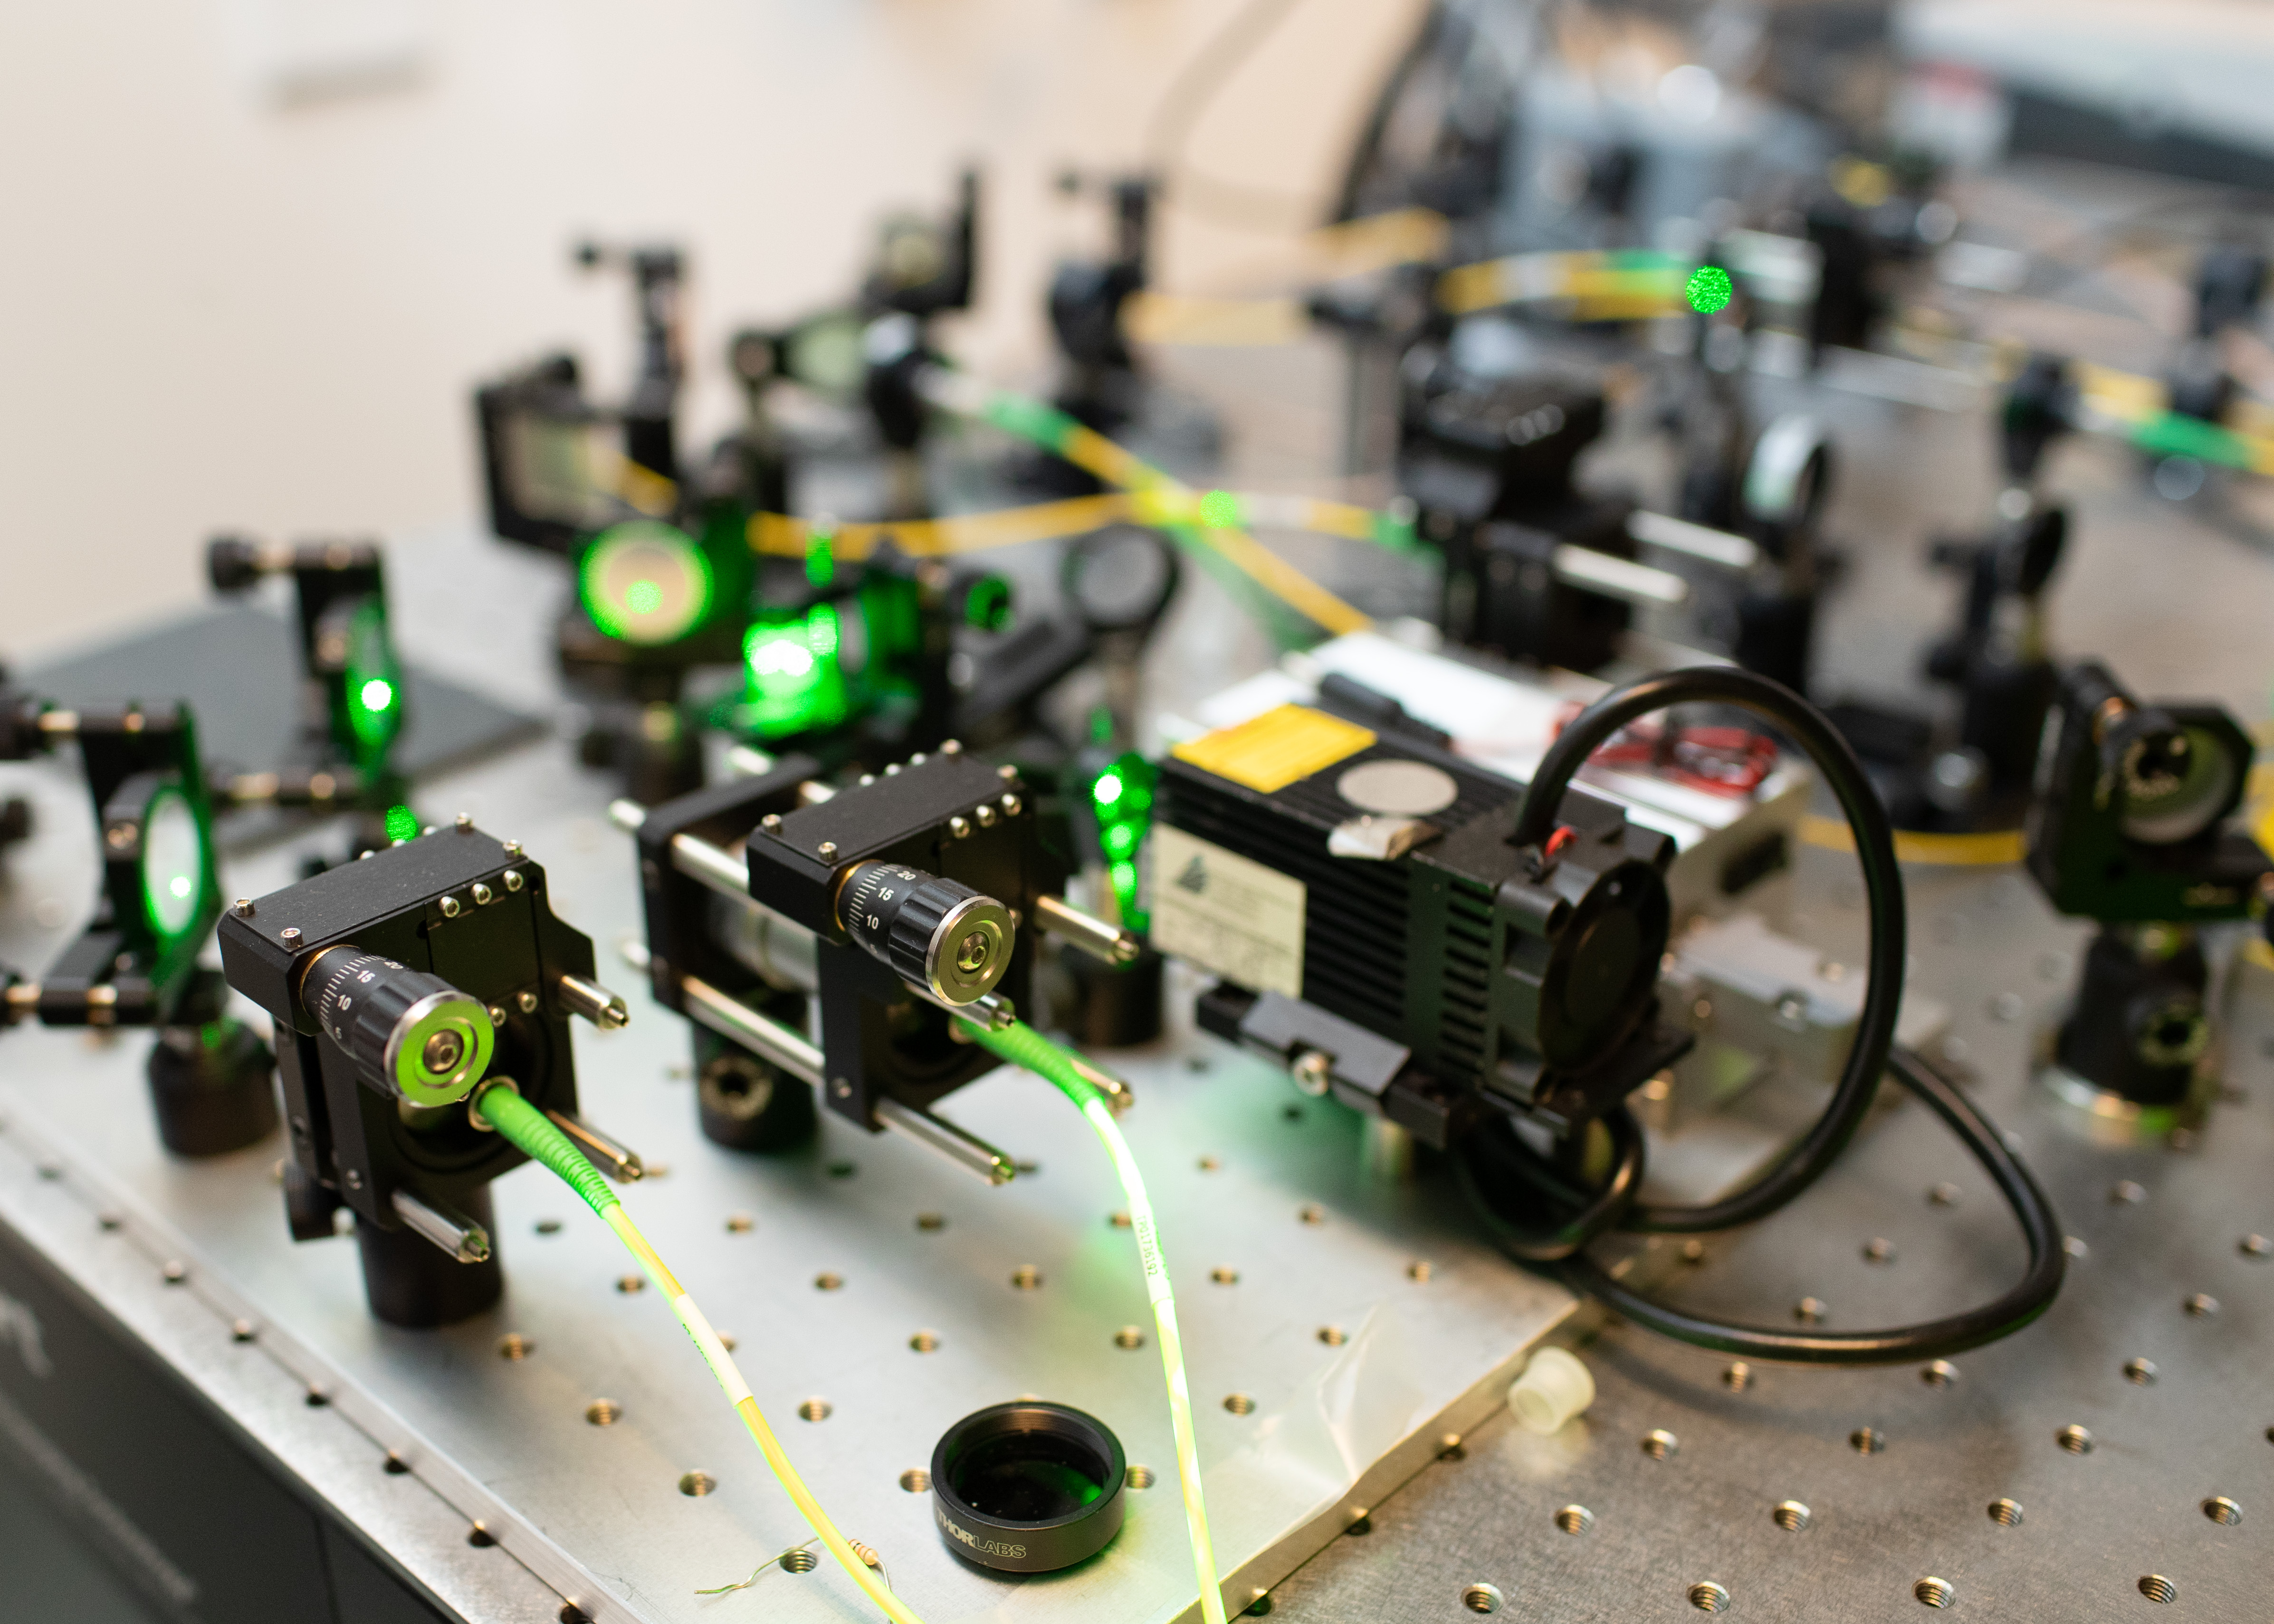 S.Lo/Part of the setup, custom built by scientists at UTS, to demonstrate the novel all-optical nano-thermometry technique